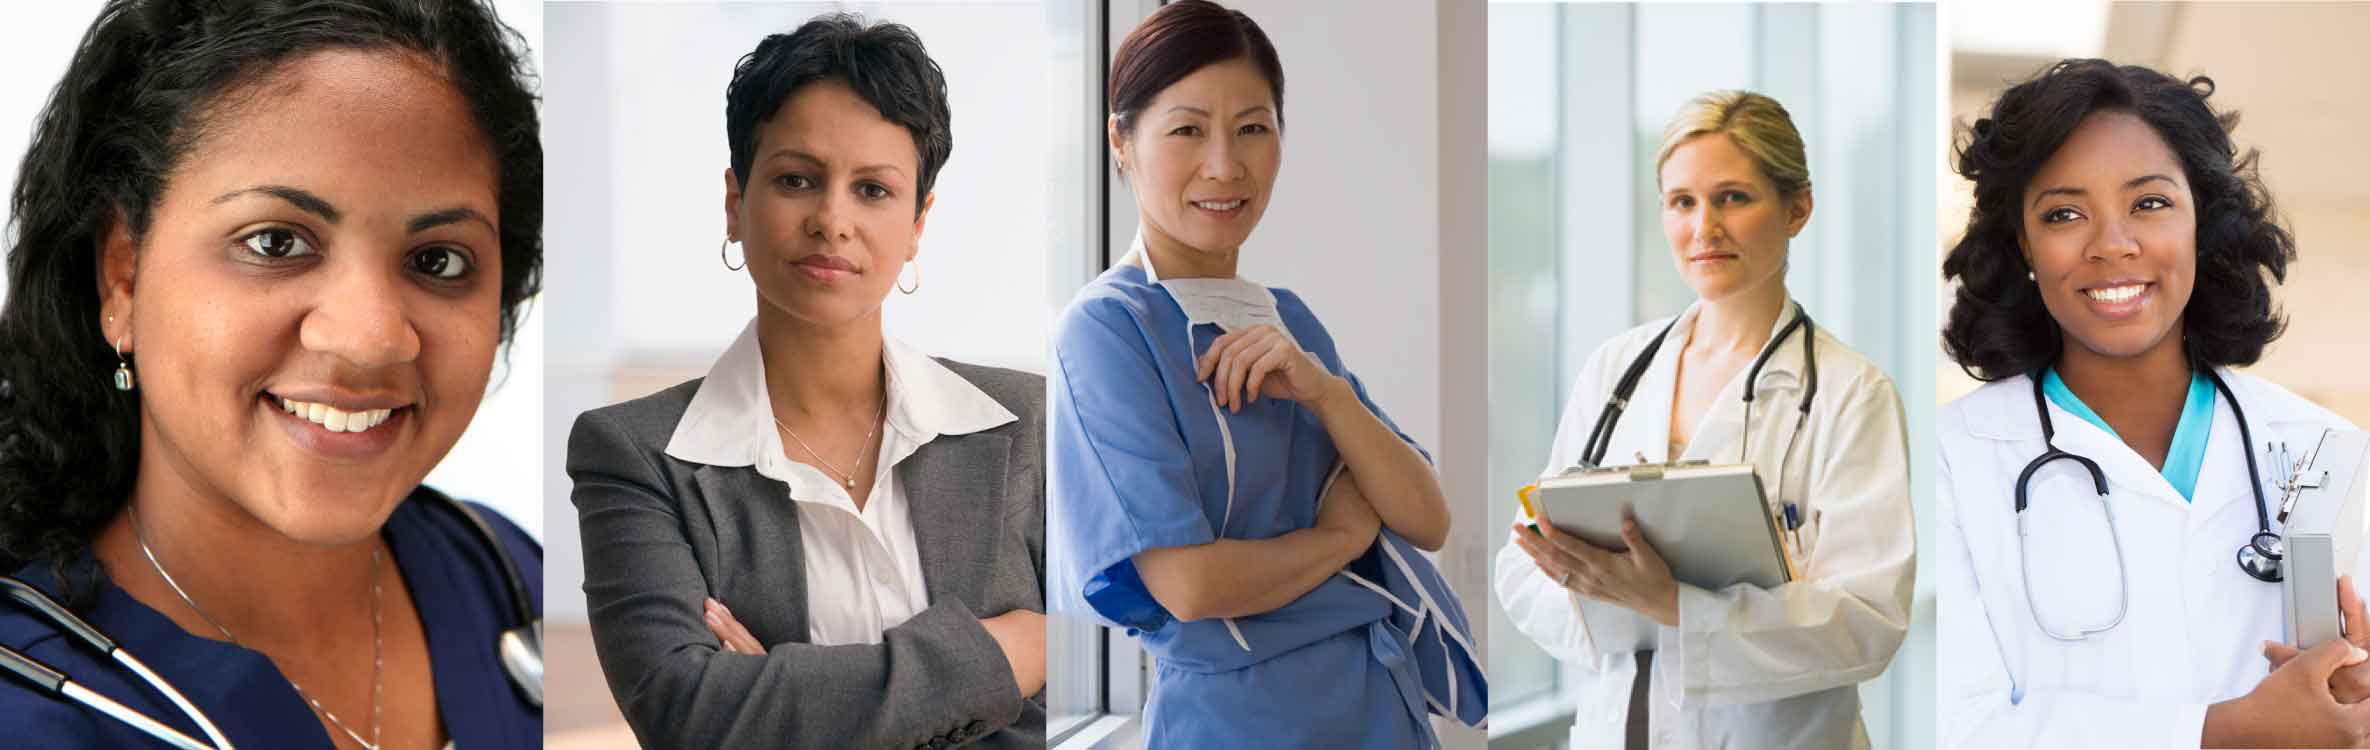 Female Healthcare Workers